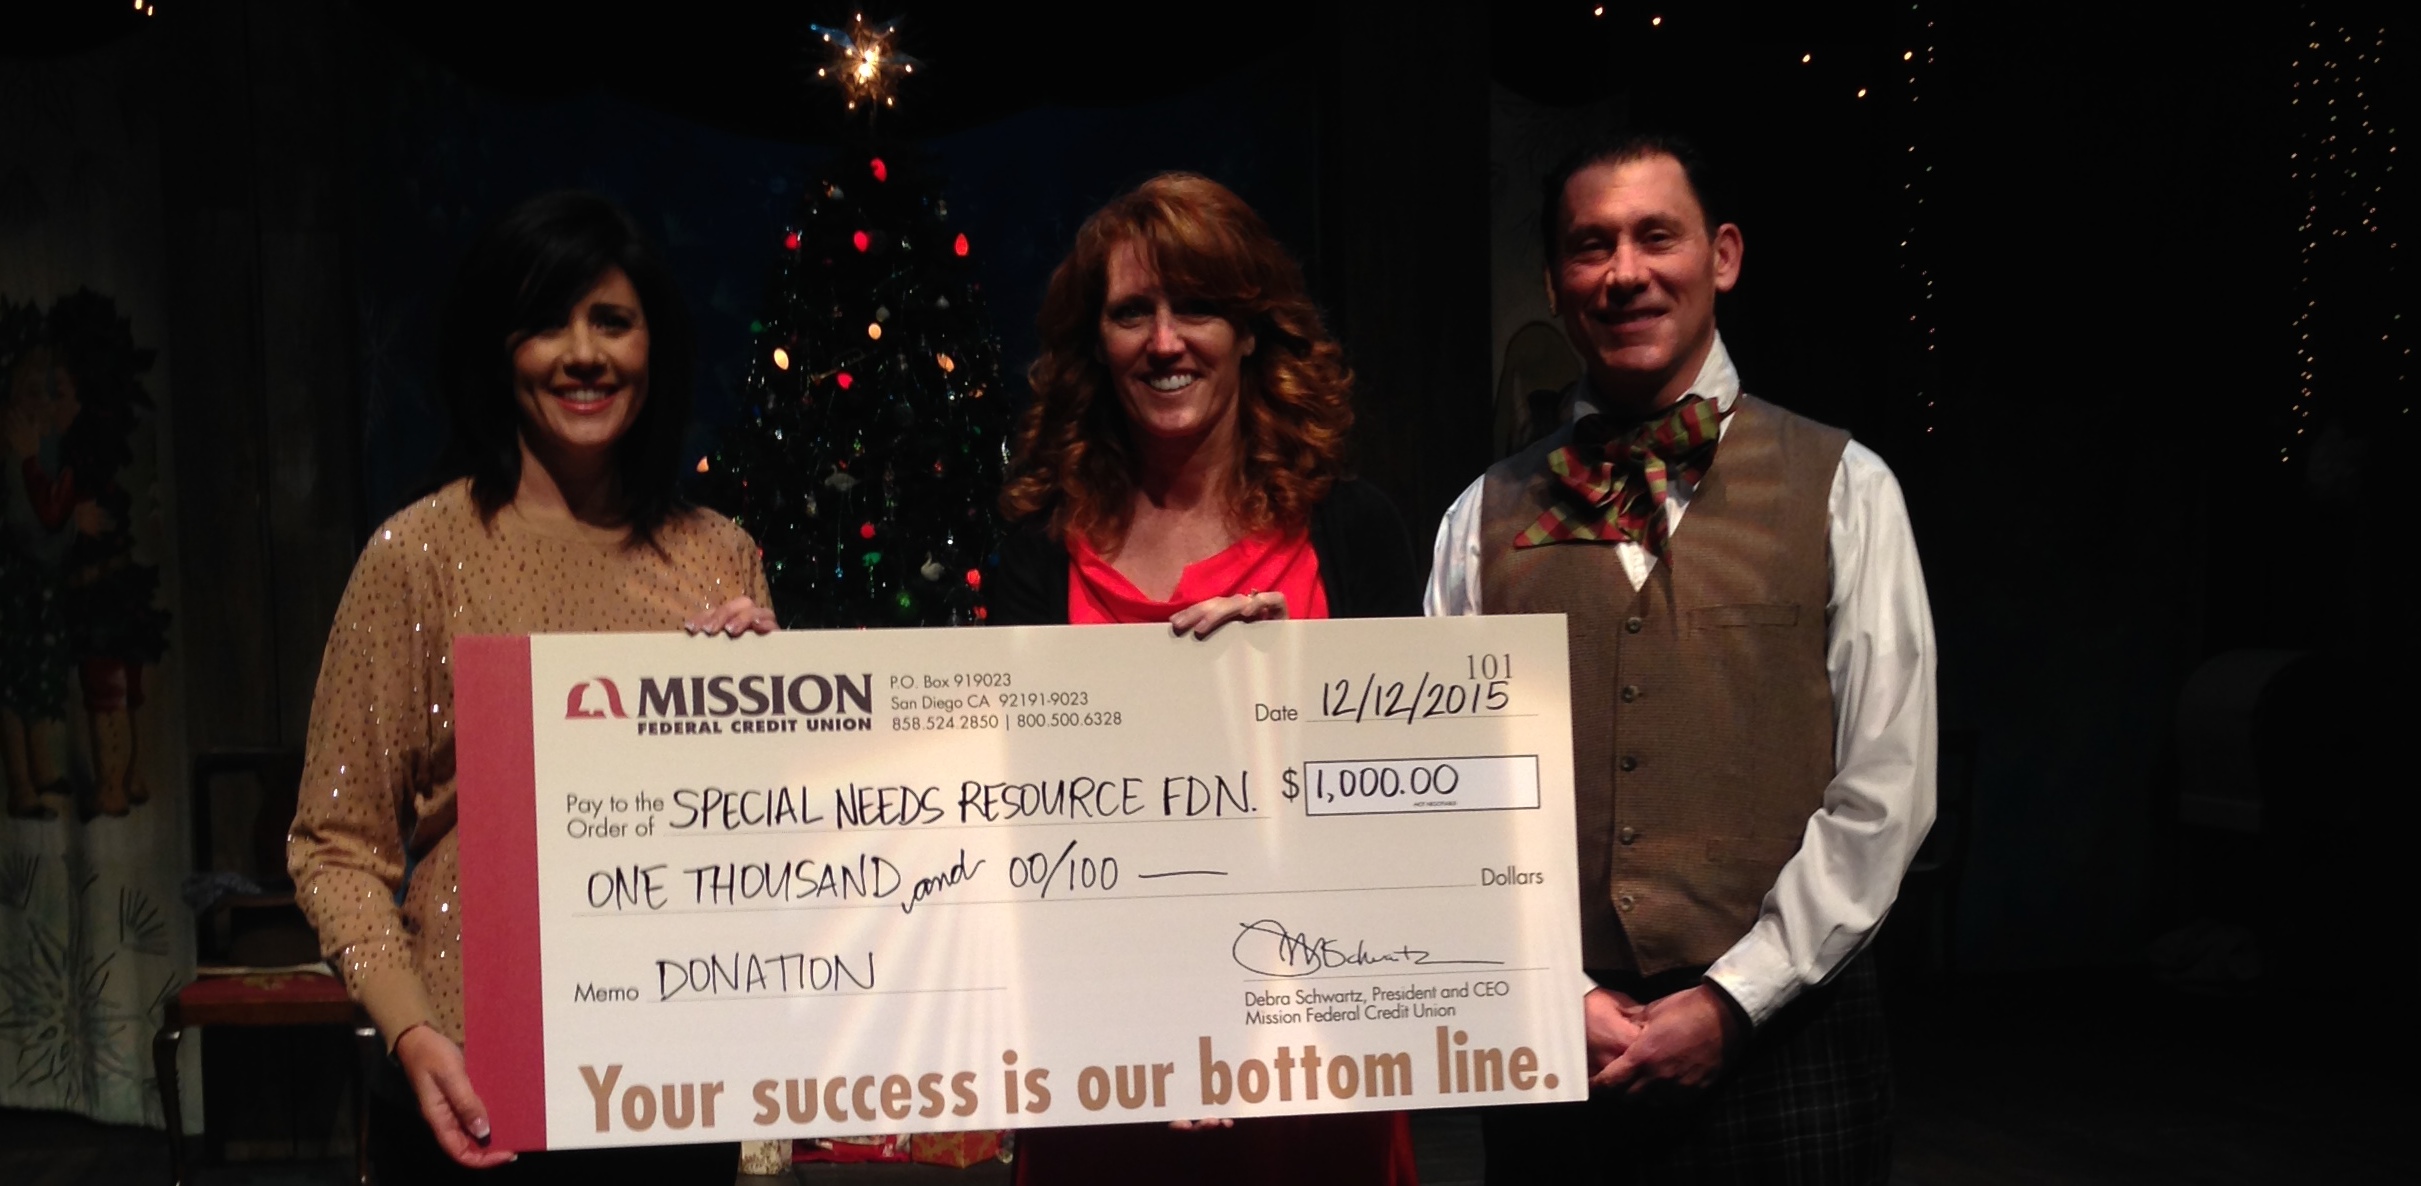 Thank You Mission Federal Credit Union!